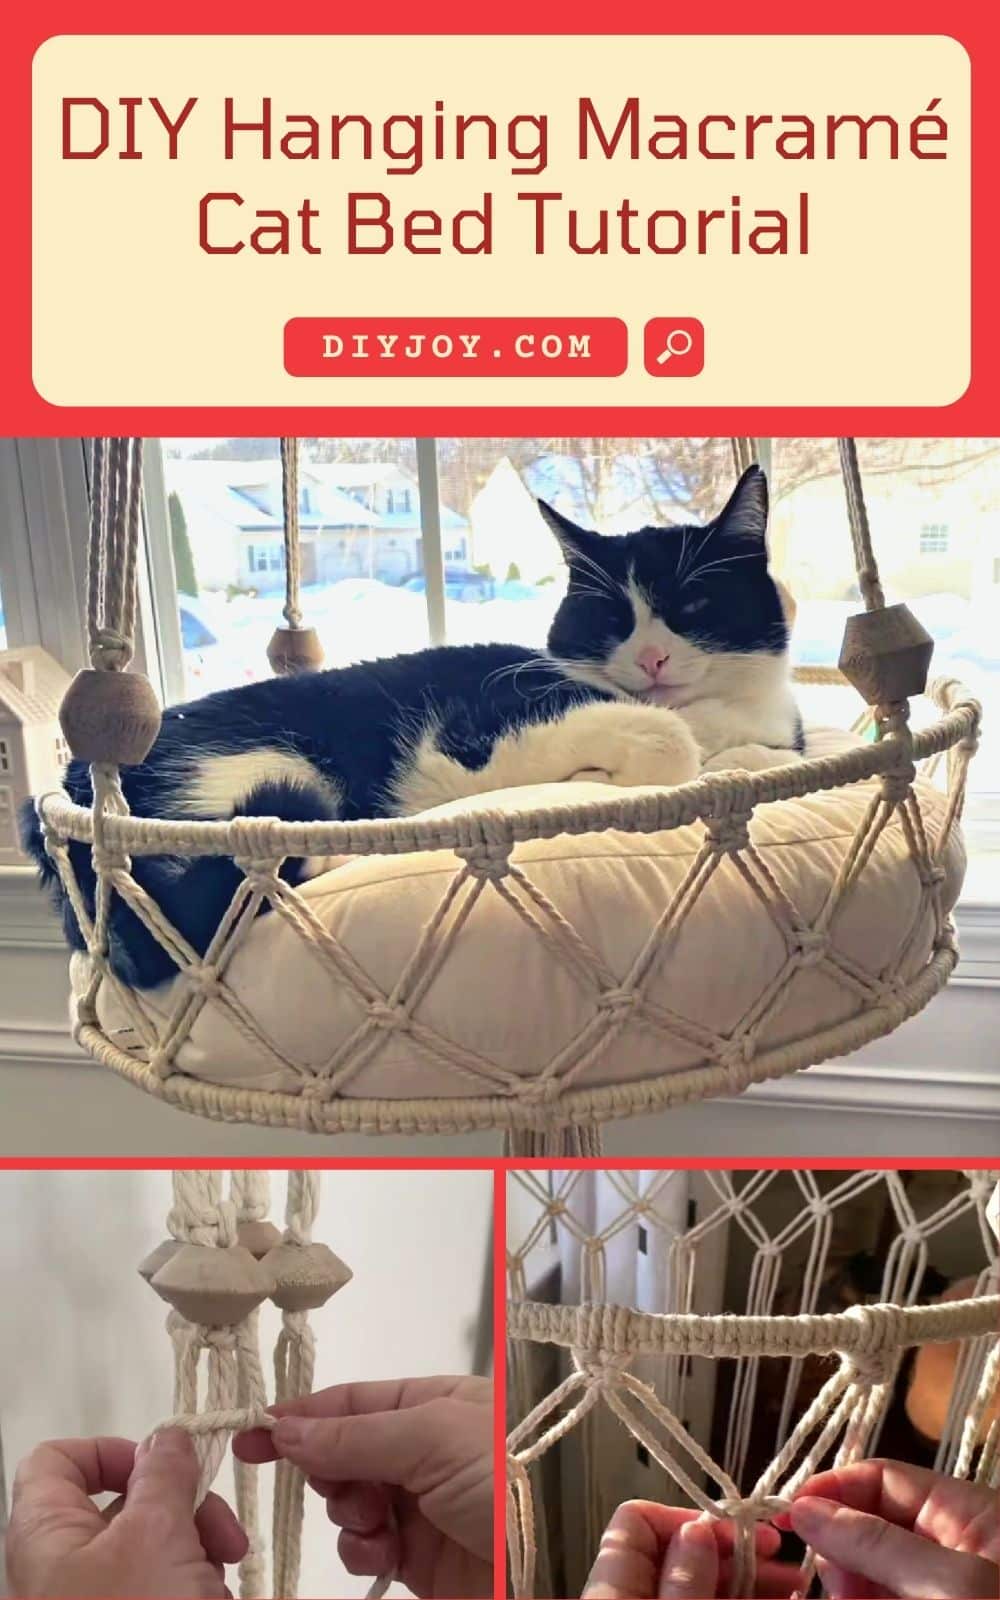 DIY Cat Bed - How to Make a Hanging Macrame Cat Bed